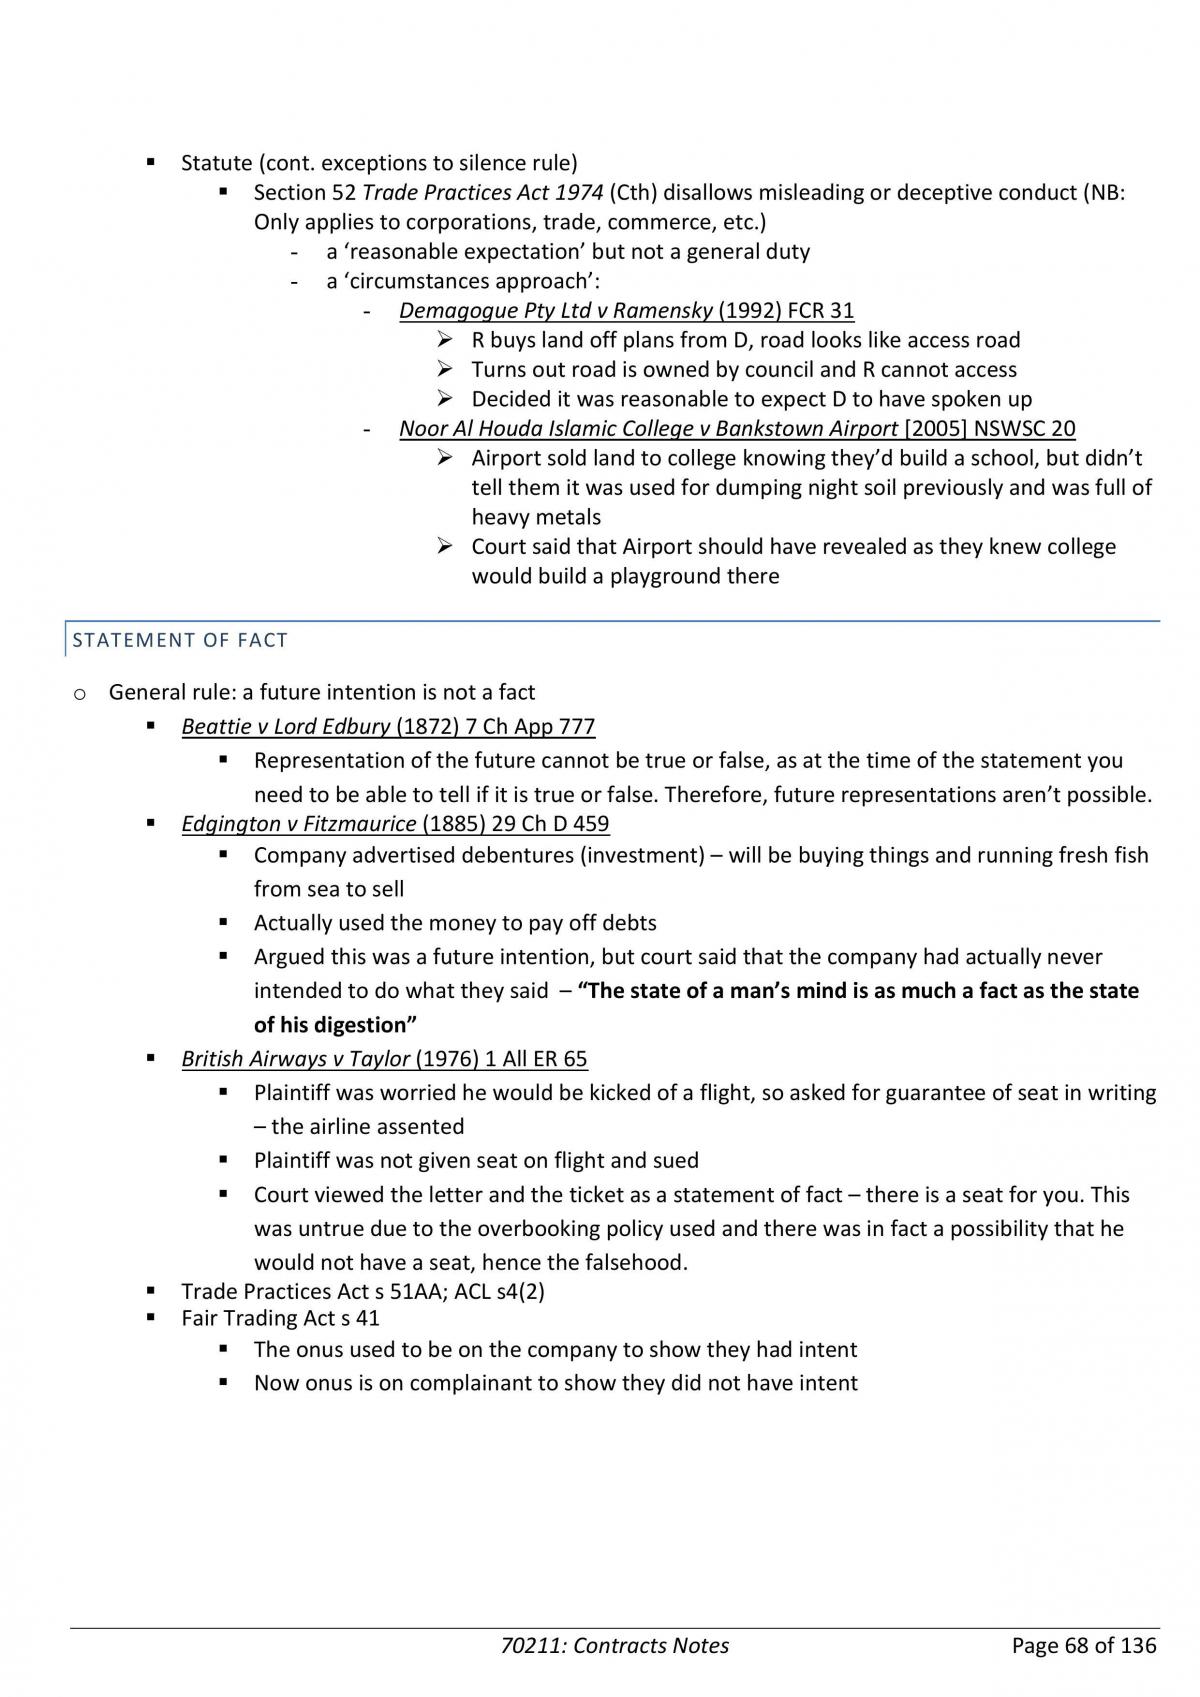 Contracts 70211 Full Notes - HD - Page 68